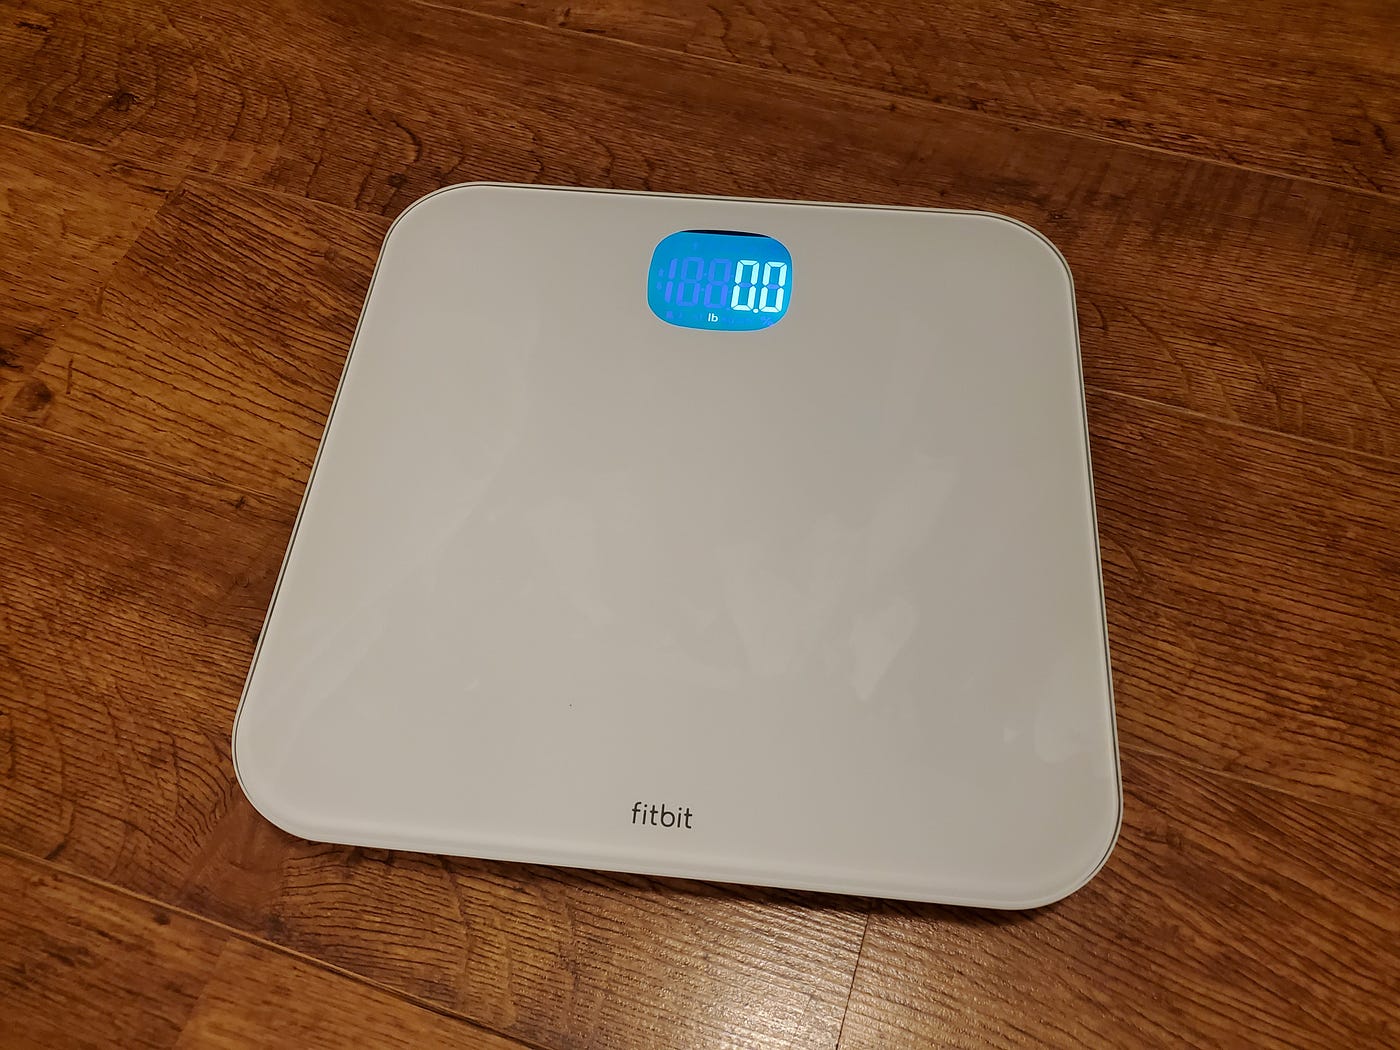 Aria Air Sync: A Step-by-Step Guide To Syncing Your Fitbit Aria Air Scale